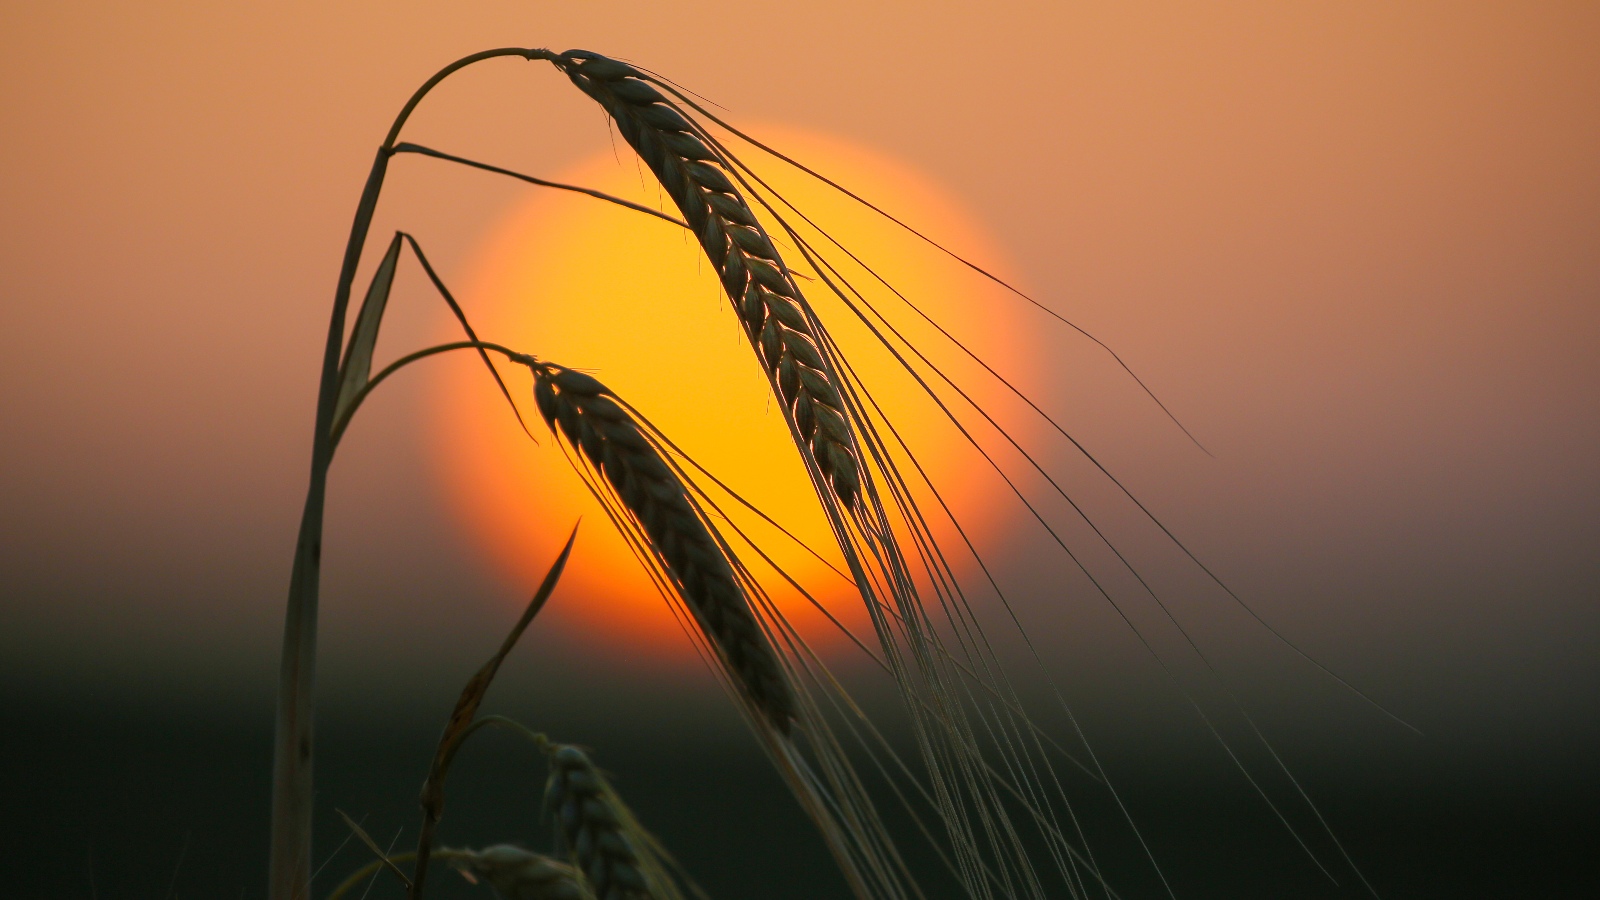 A droopy stalk of wheat silhouetted in the sunset.